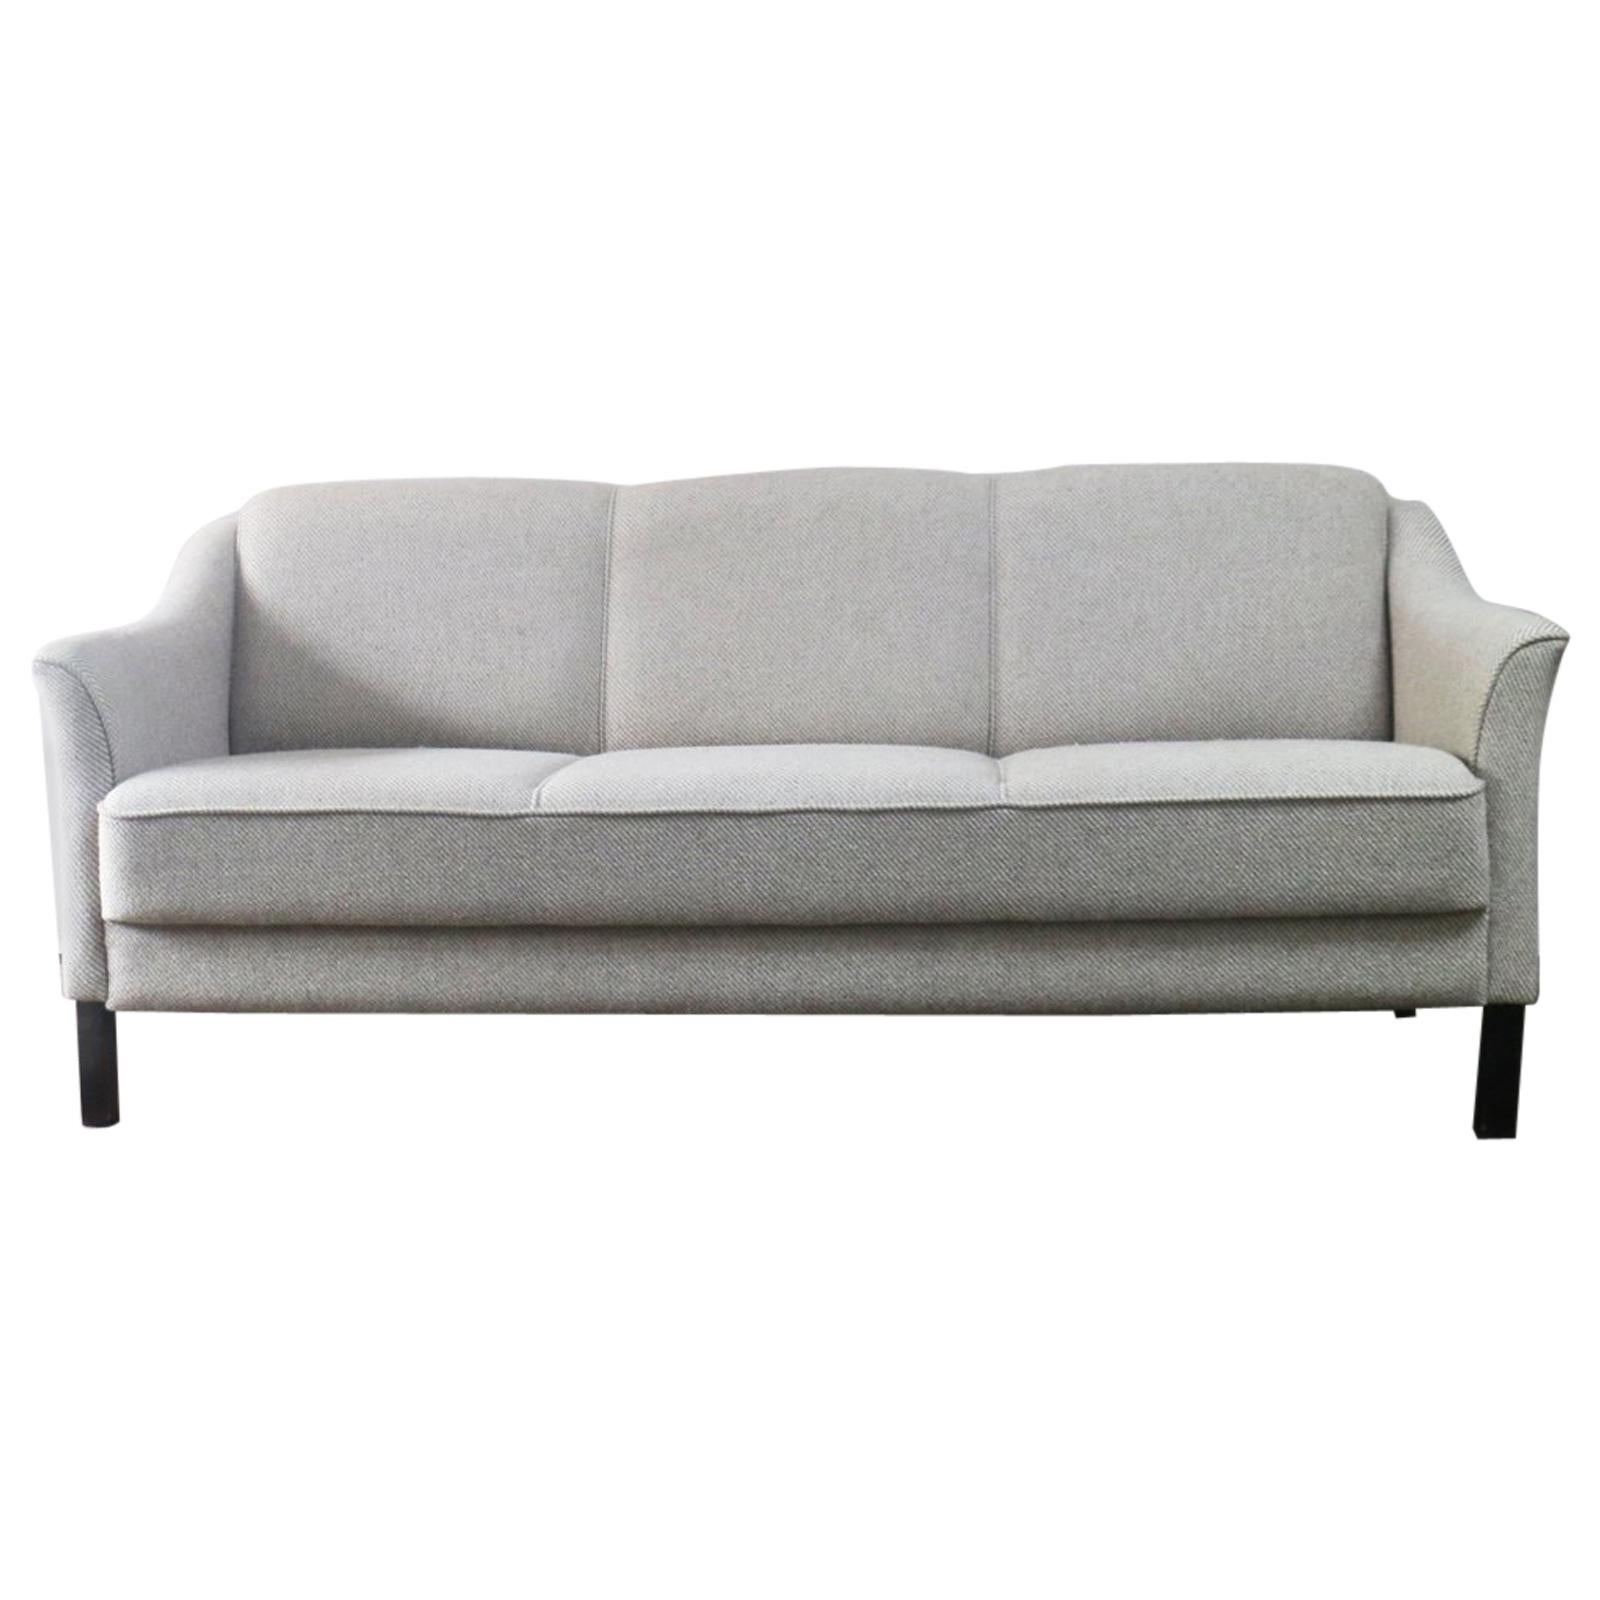 1970s Danish Midcentury Sofa with Original Wool Upholstery For Sale